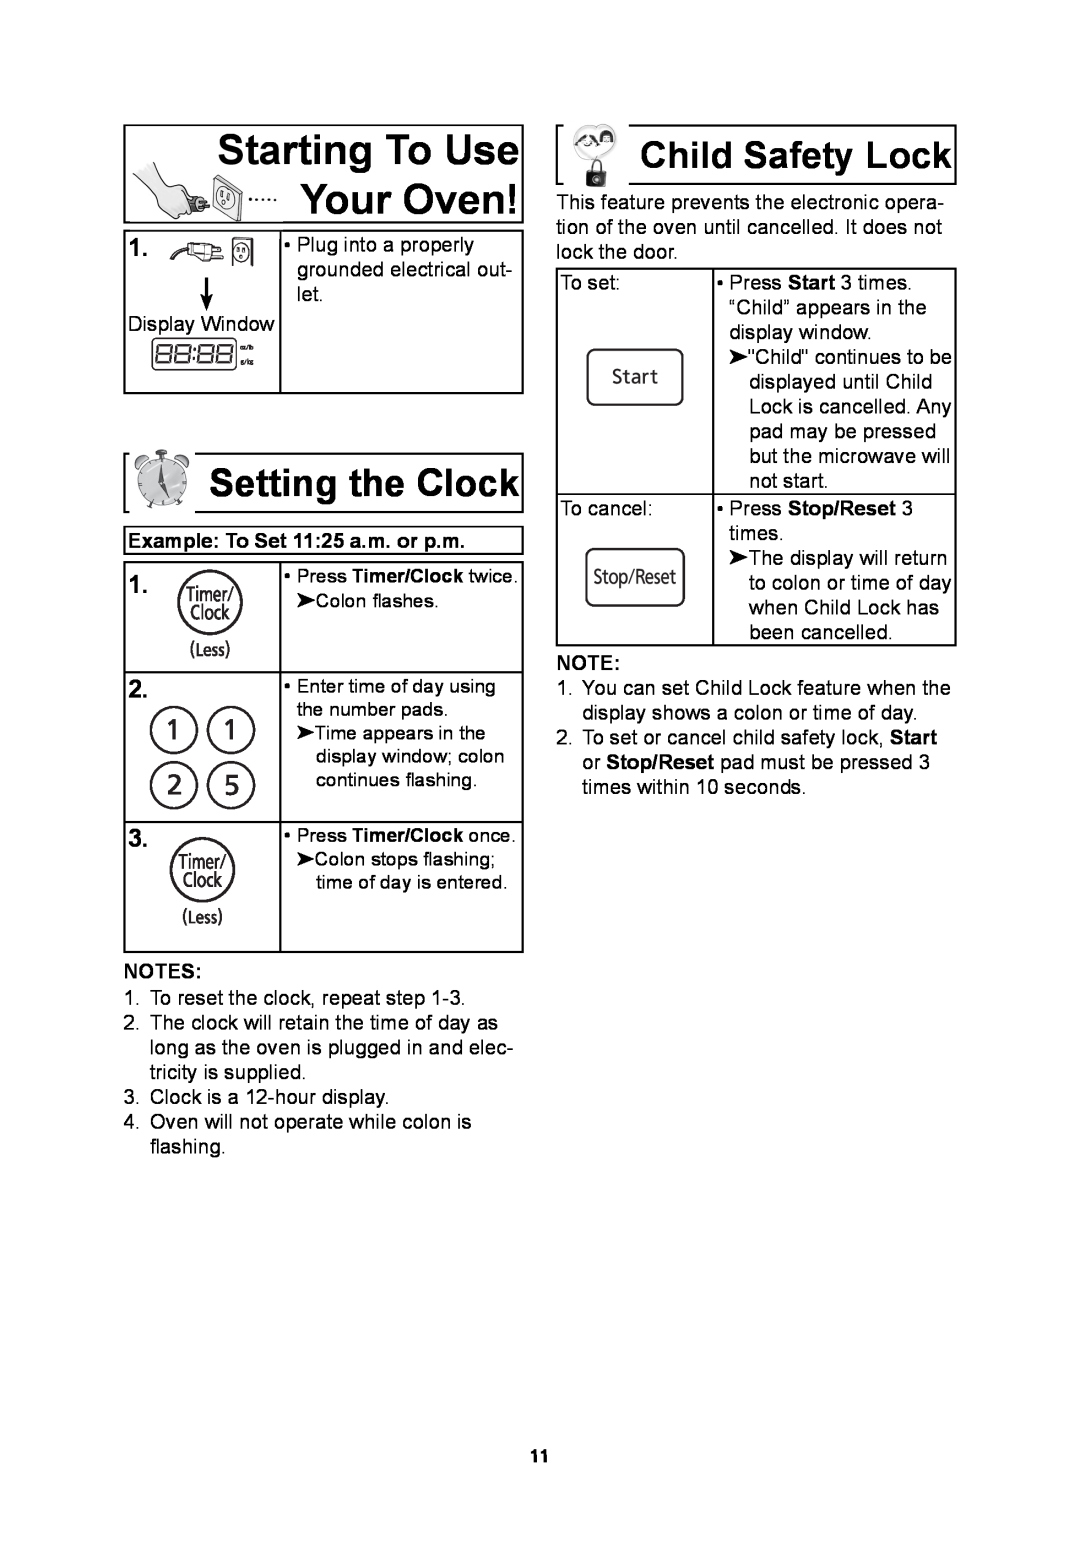 Panasonic NNSN973S important safety instructions Starting To Use Your Oven, Setting the Clock, Child Safety Lock 